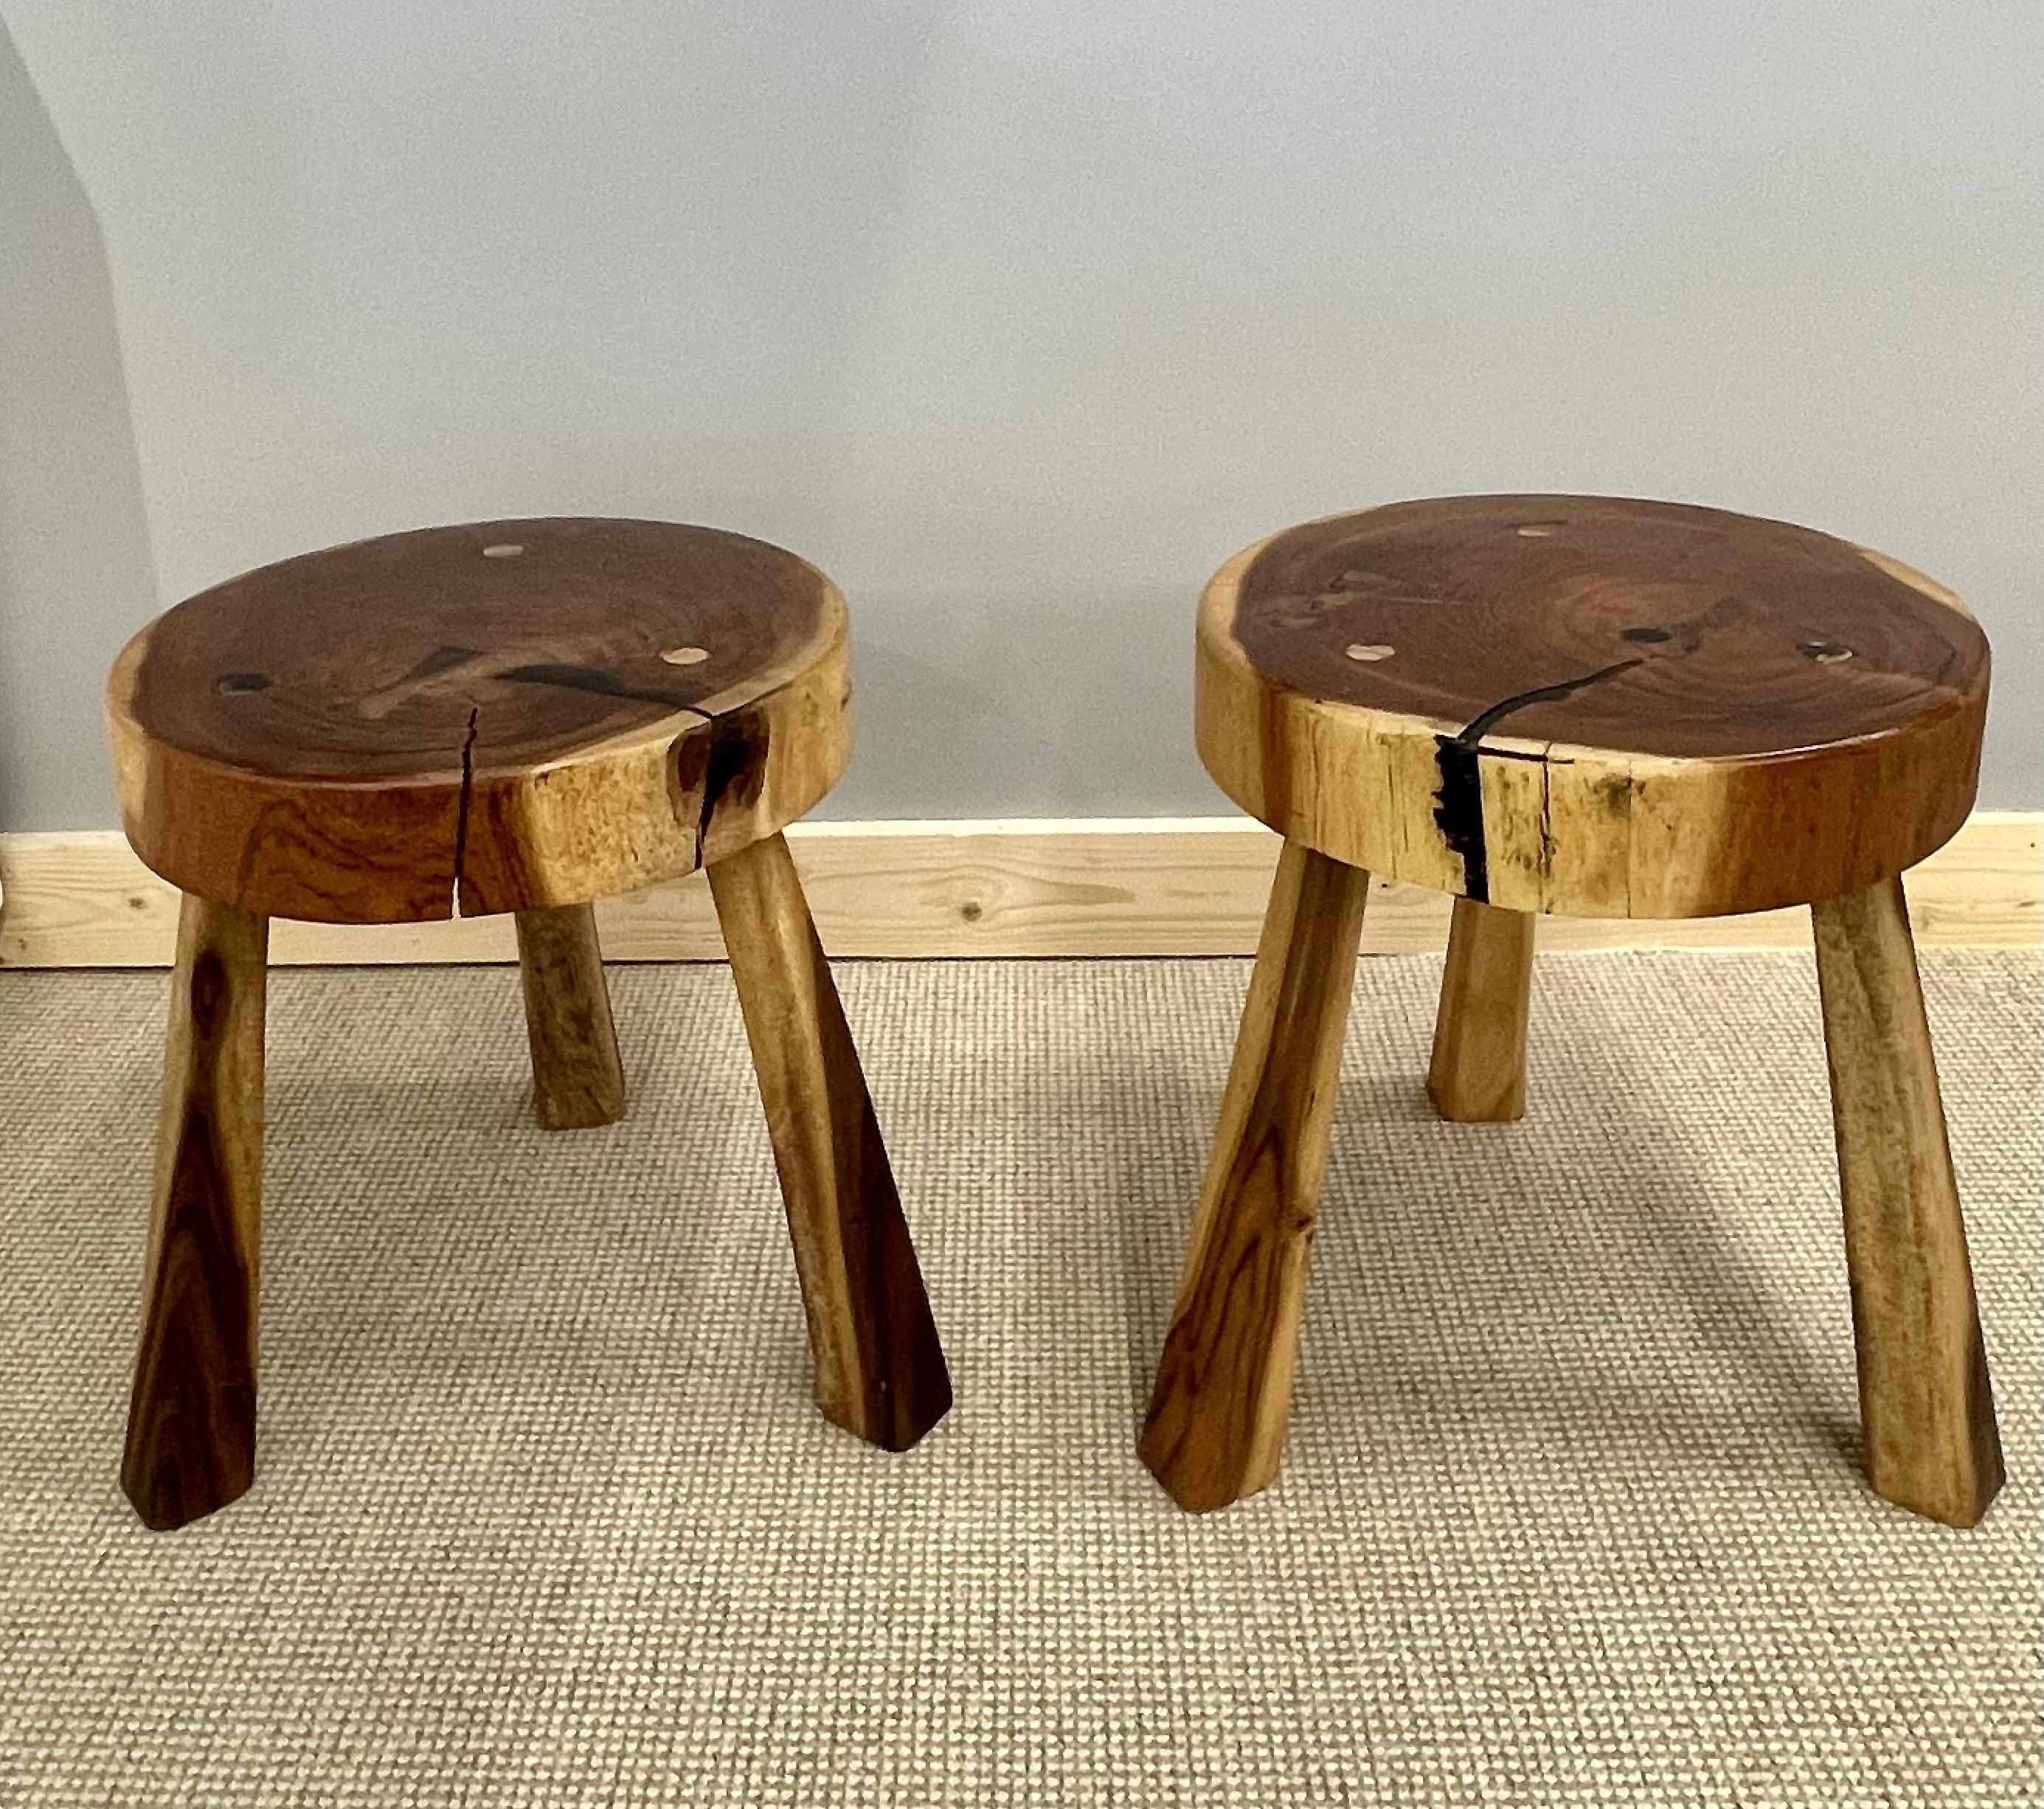 Pair Mid-Century Modern Nakashima Style Organic Wooden Two Stools / Side Tables
 
Organic form wooden stools from the 20th Century. American studio made, solid wood. These pieces can also work as low profile side tables.
 
Height: 14.5 in.
Diameter: